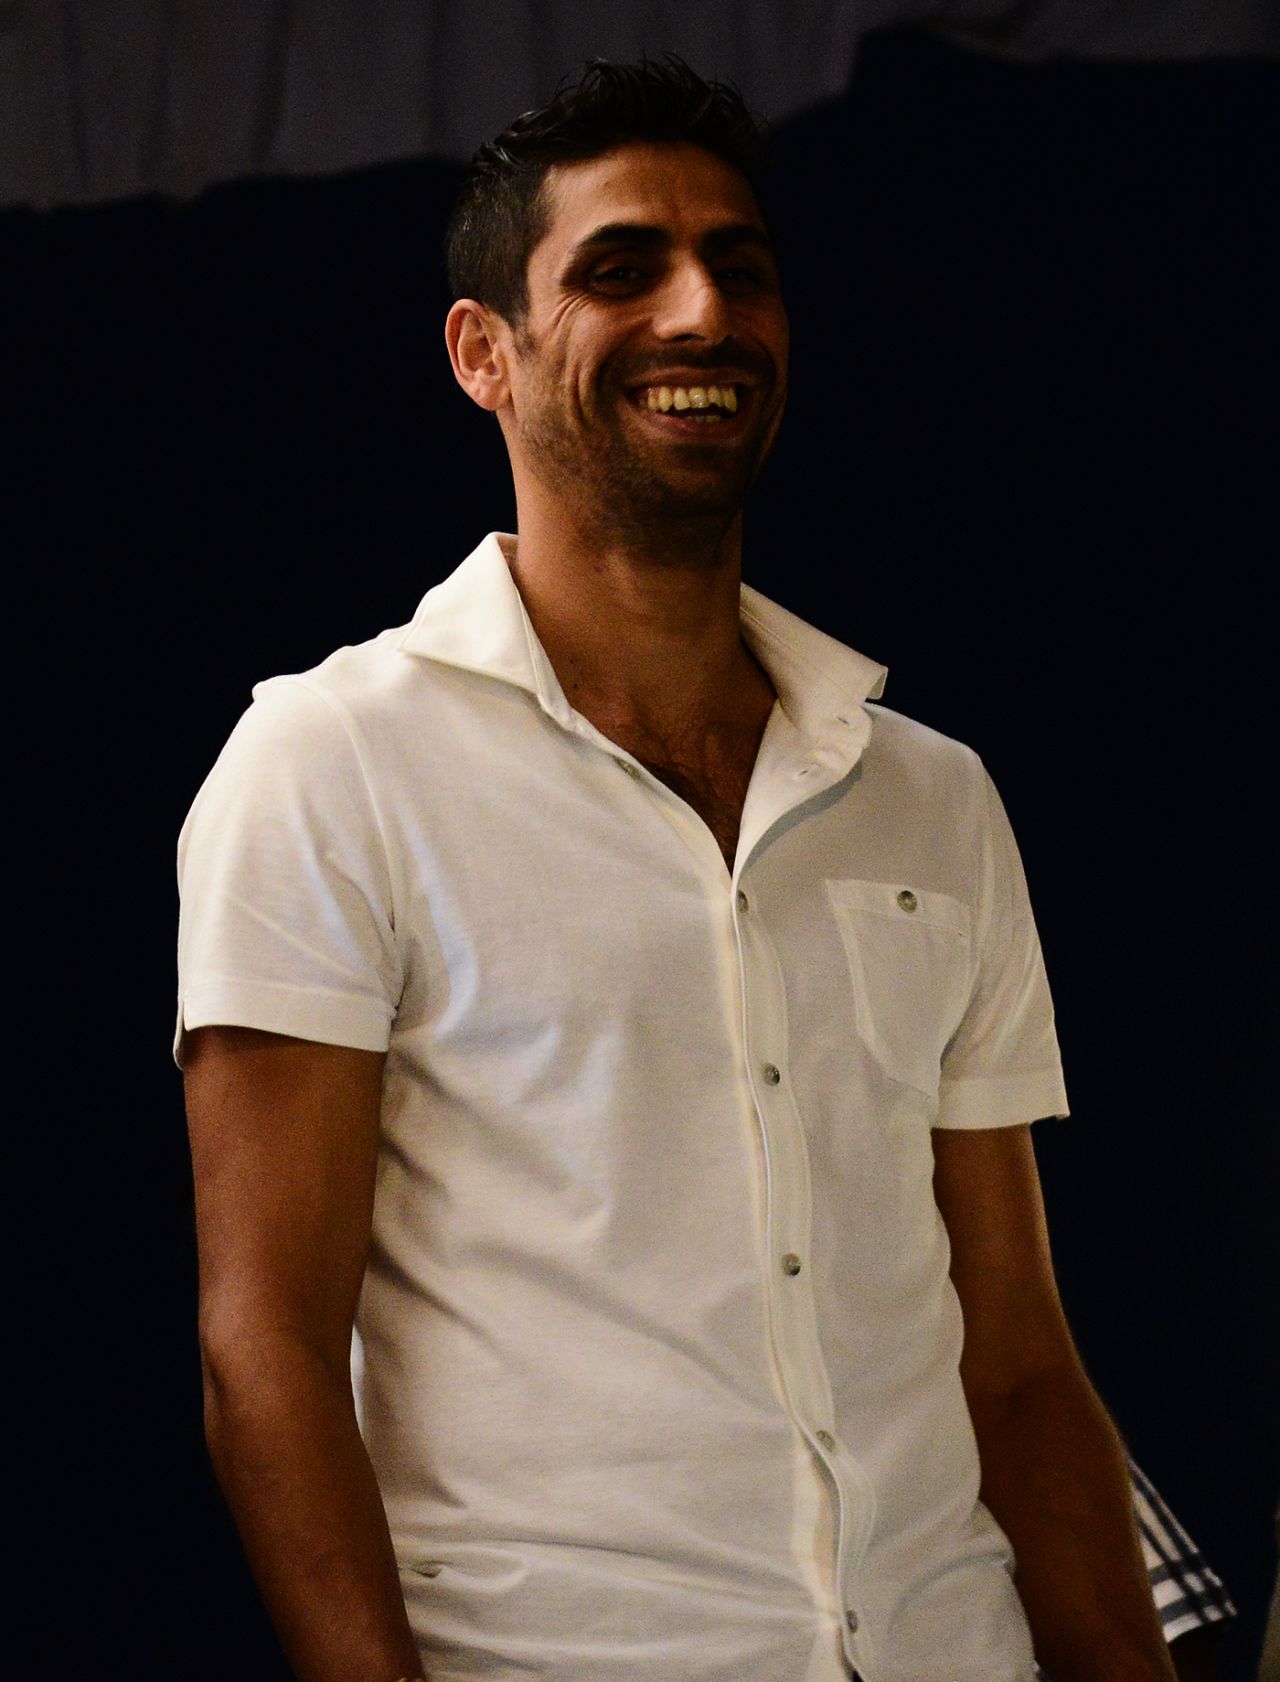 Ashish Nehra attends the opening of the Ashish Nehra academy in Allahabad, April 6, 2016